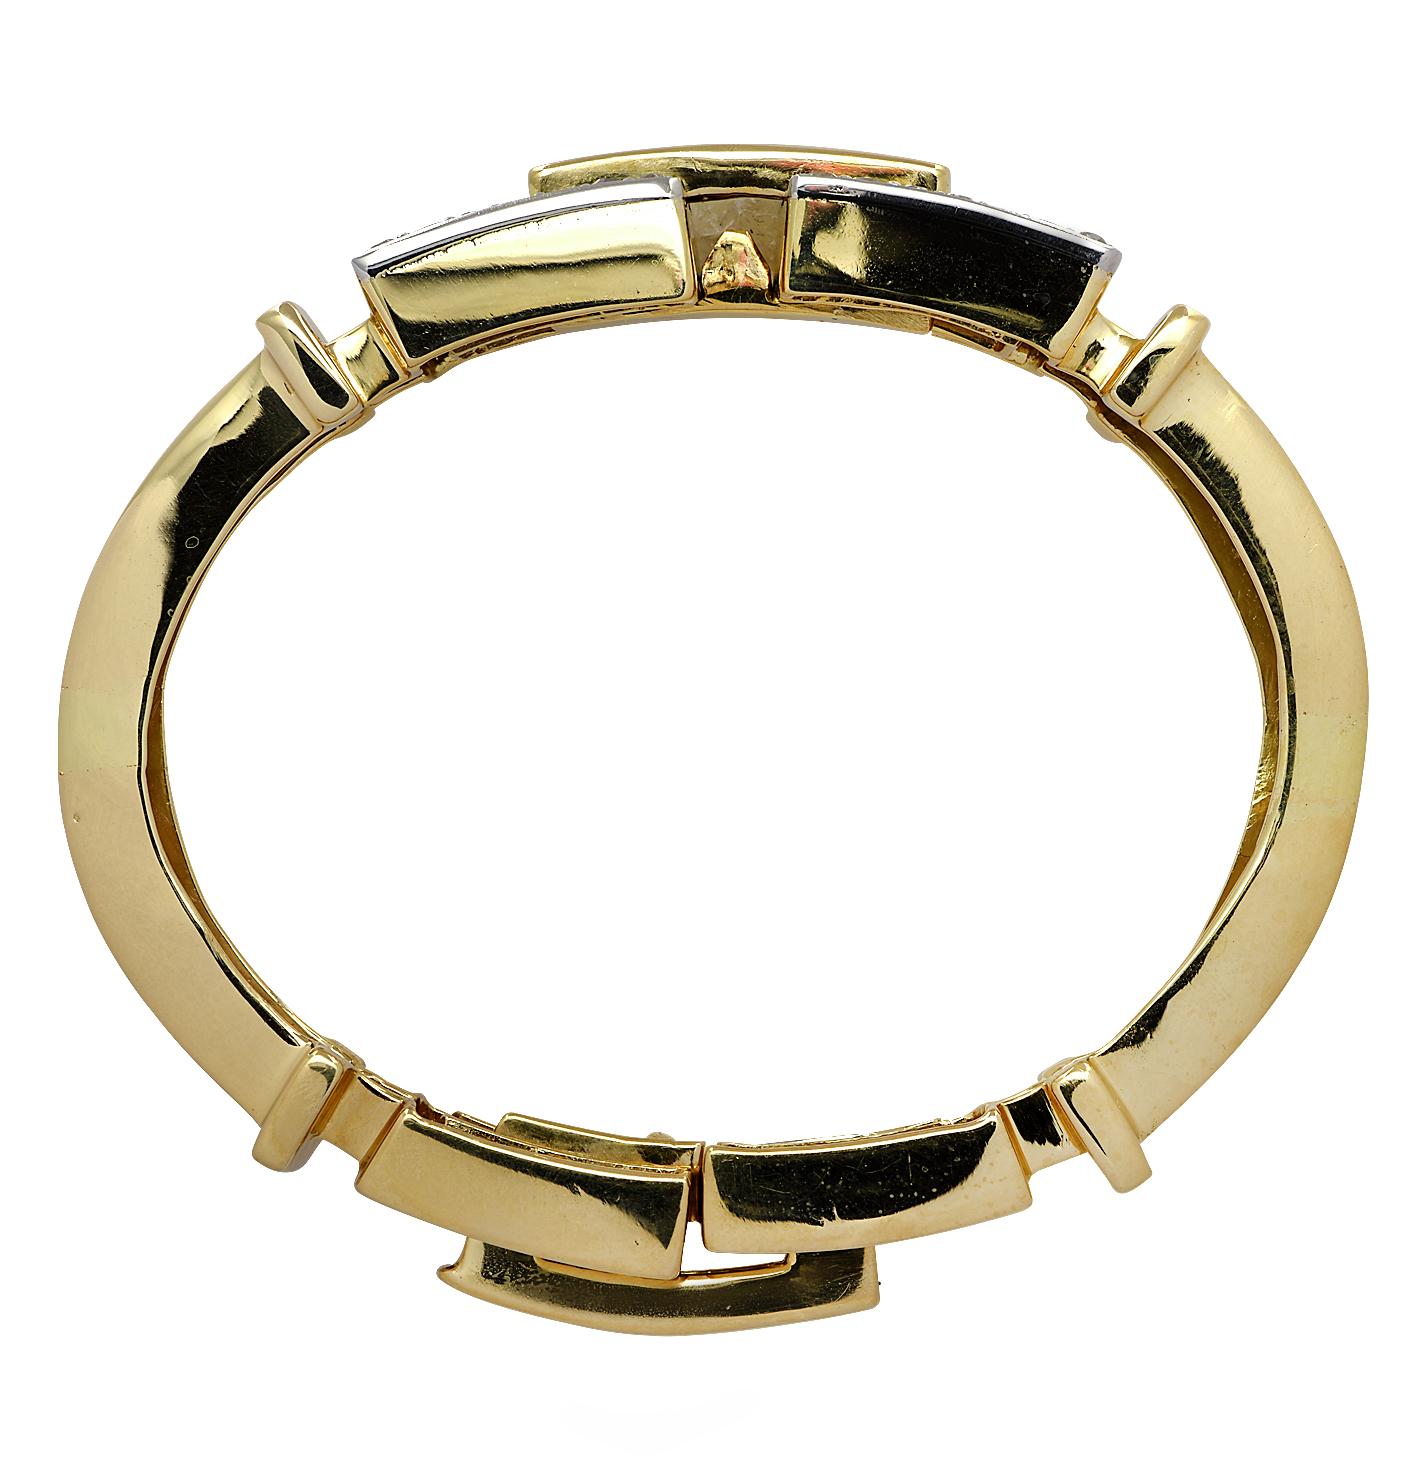 Striking Retro bangle bracelet circa 1950, crafted in 18 karat yellow gold, featuring 32 Old European Cut diamonds weighing approximately 1.60 carats total, G-H color, VS-SI clarity set in an 18 karat white gold plate. This stunning bracelet